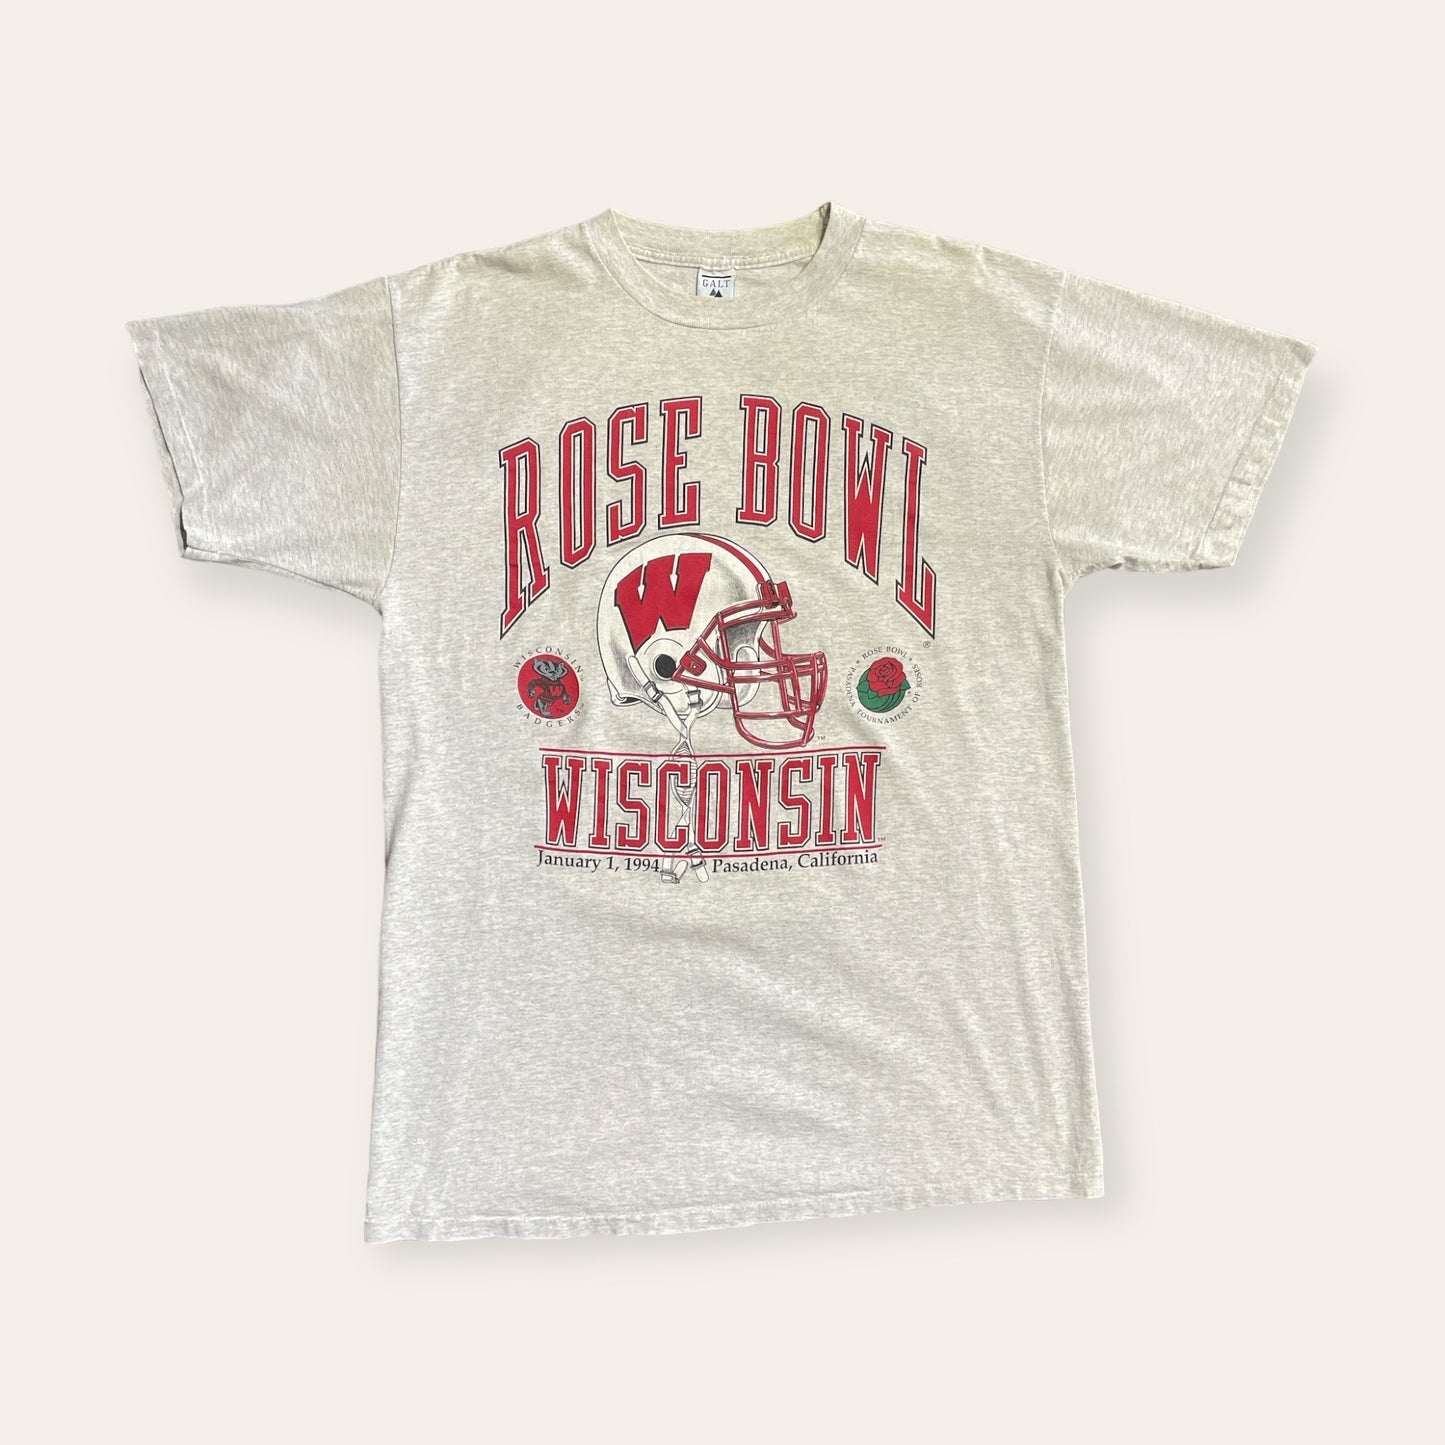 1994 Wisconsin Rose Bowl Tee Size XL